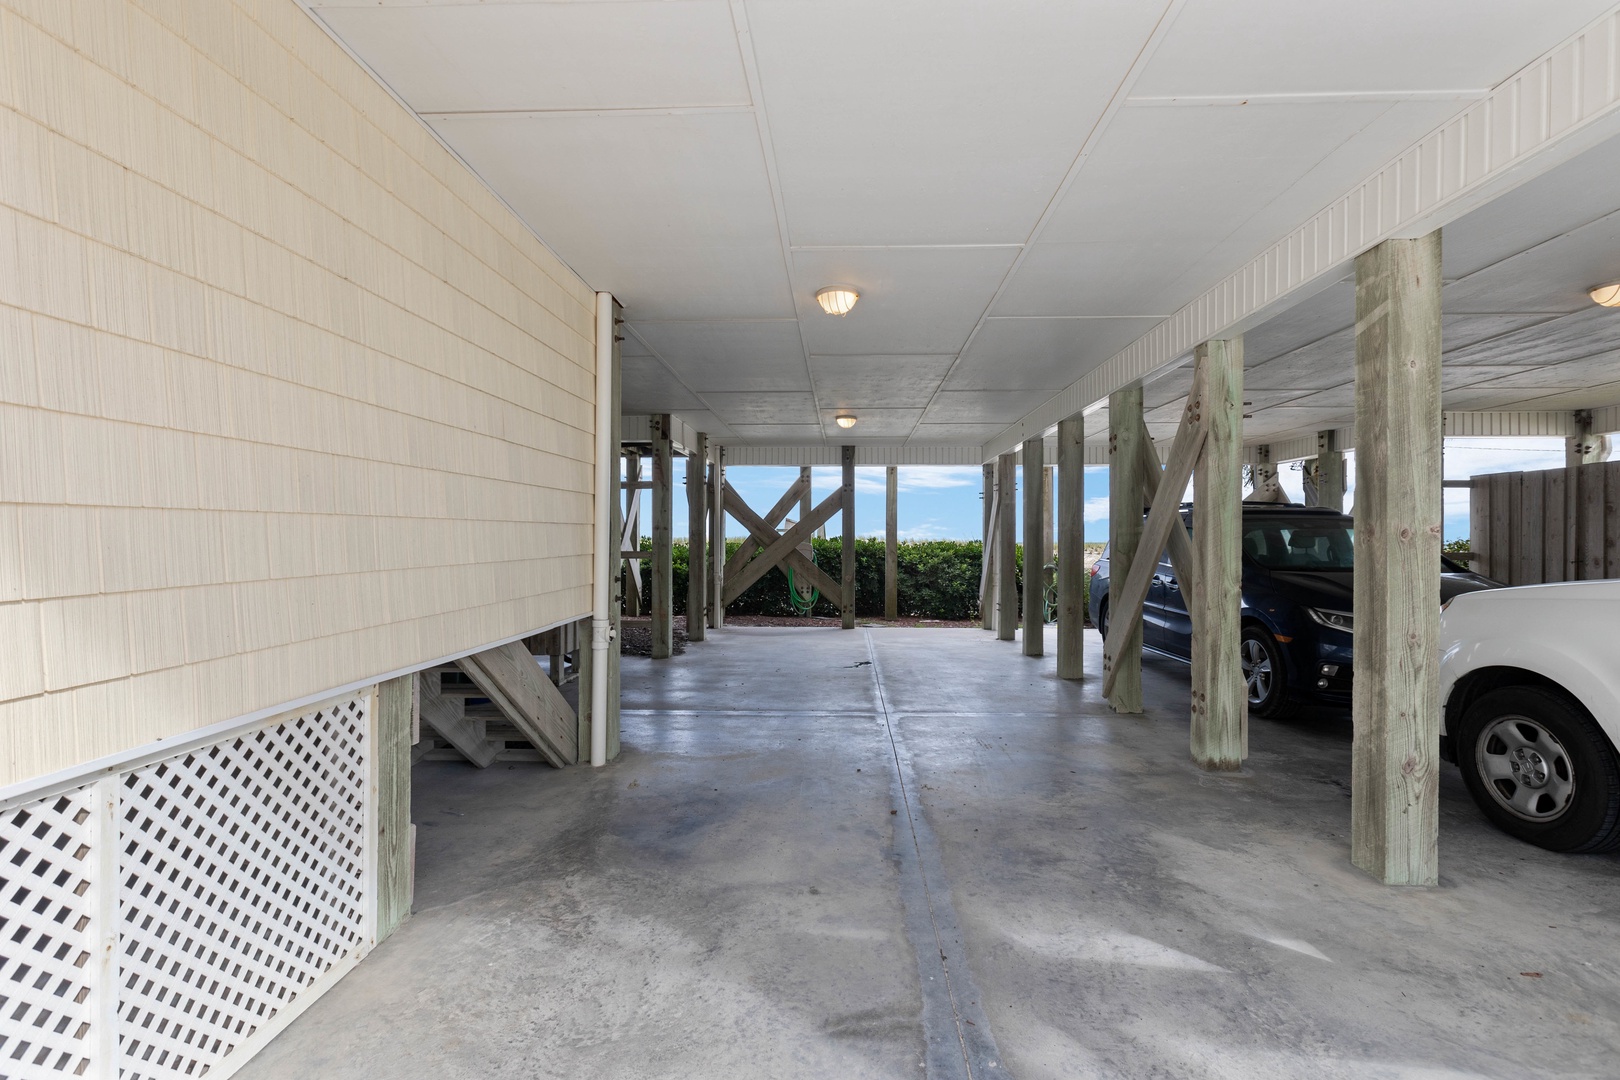 The covered carport